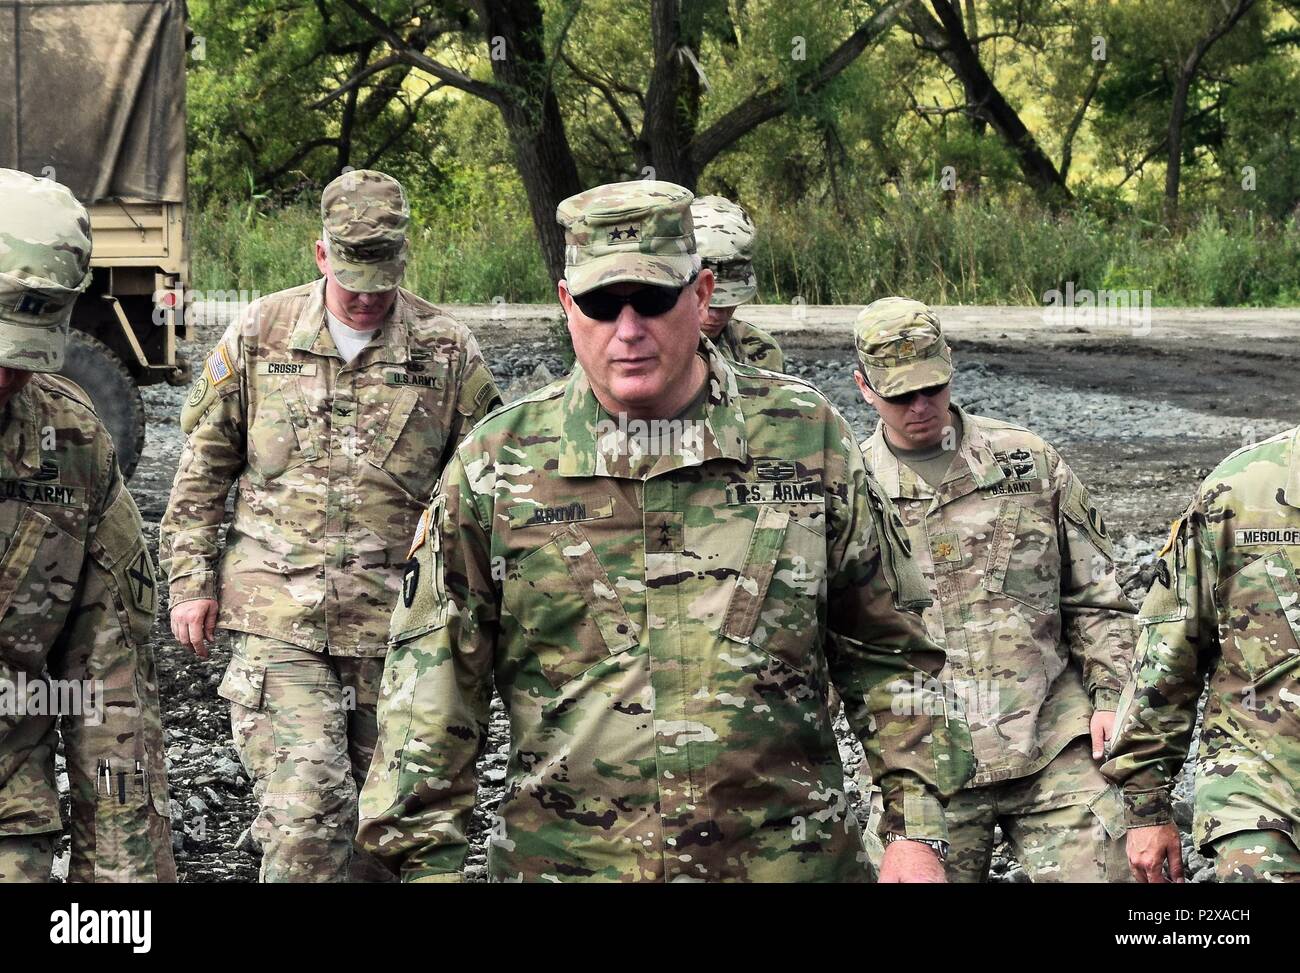 Maj. Gen. James Brown, Jr. (center), Deputy Commanding General Reserve Components, U.S. Army, arrives at Cincu, Romania on August 2, 2016 during Operation Resolute Castle, a military construction project spanning across the Eastern European countries of Estonia, Hungary, Romania, and Bulgaria.  This operation is led by the Tennessee and Alabama Army National Guards.  As Deputy Commanding General of the Reserve Components, Maj. Gen. Brown serves as the primary advisor and personal representative to the Commanding General of the U.S. Army, and he used his visit as an opportunity to evaluate the  Stock Photo